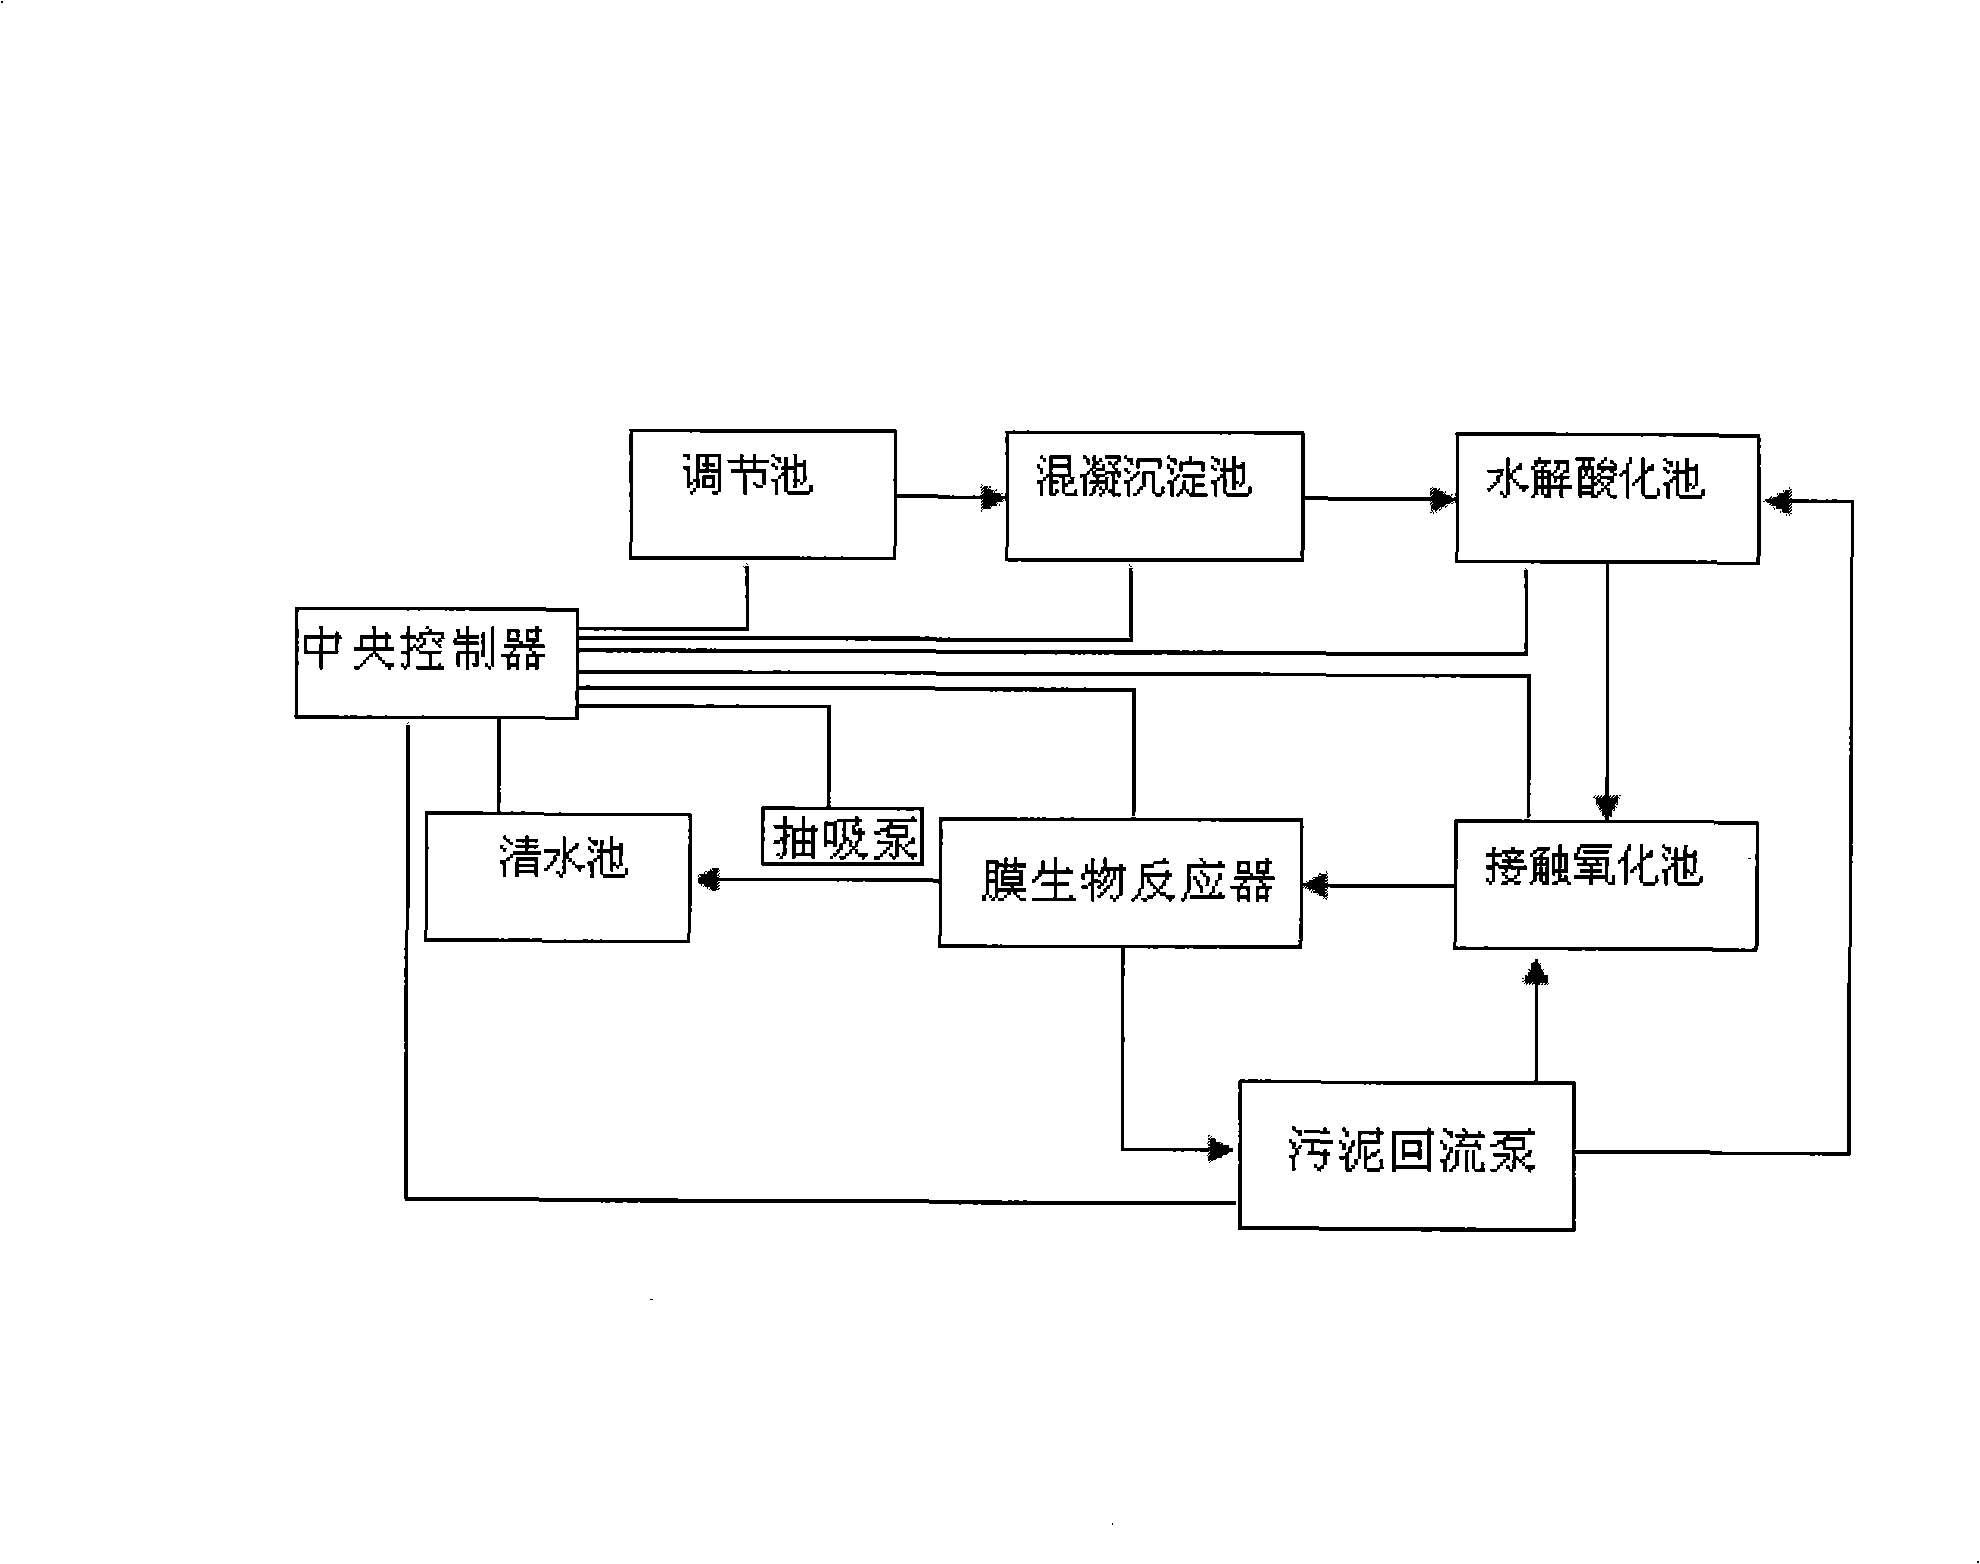 Method for treating dyeing wastewater and dedicated device